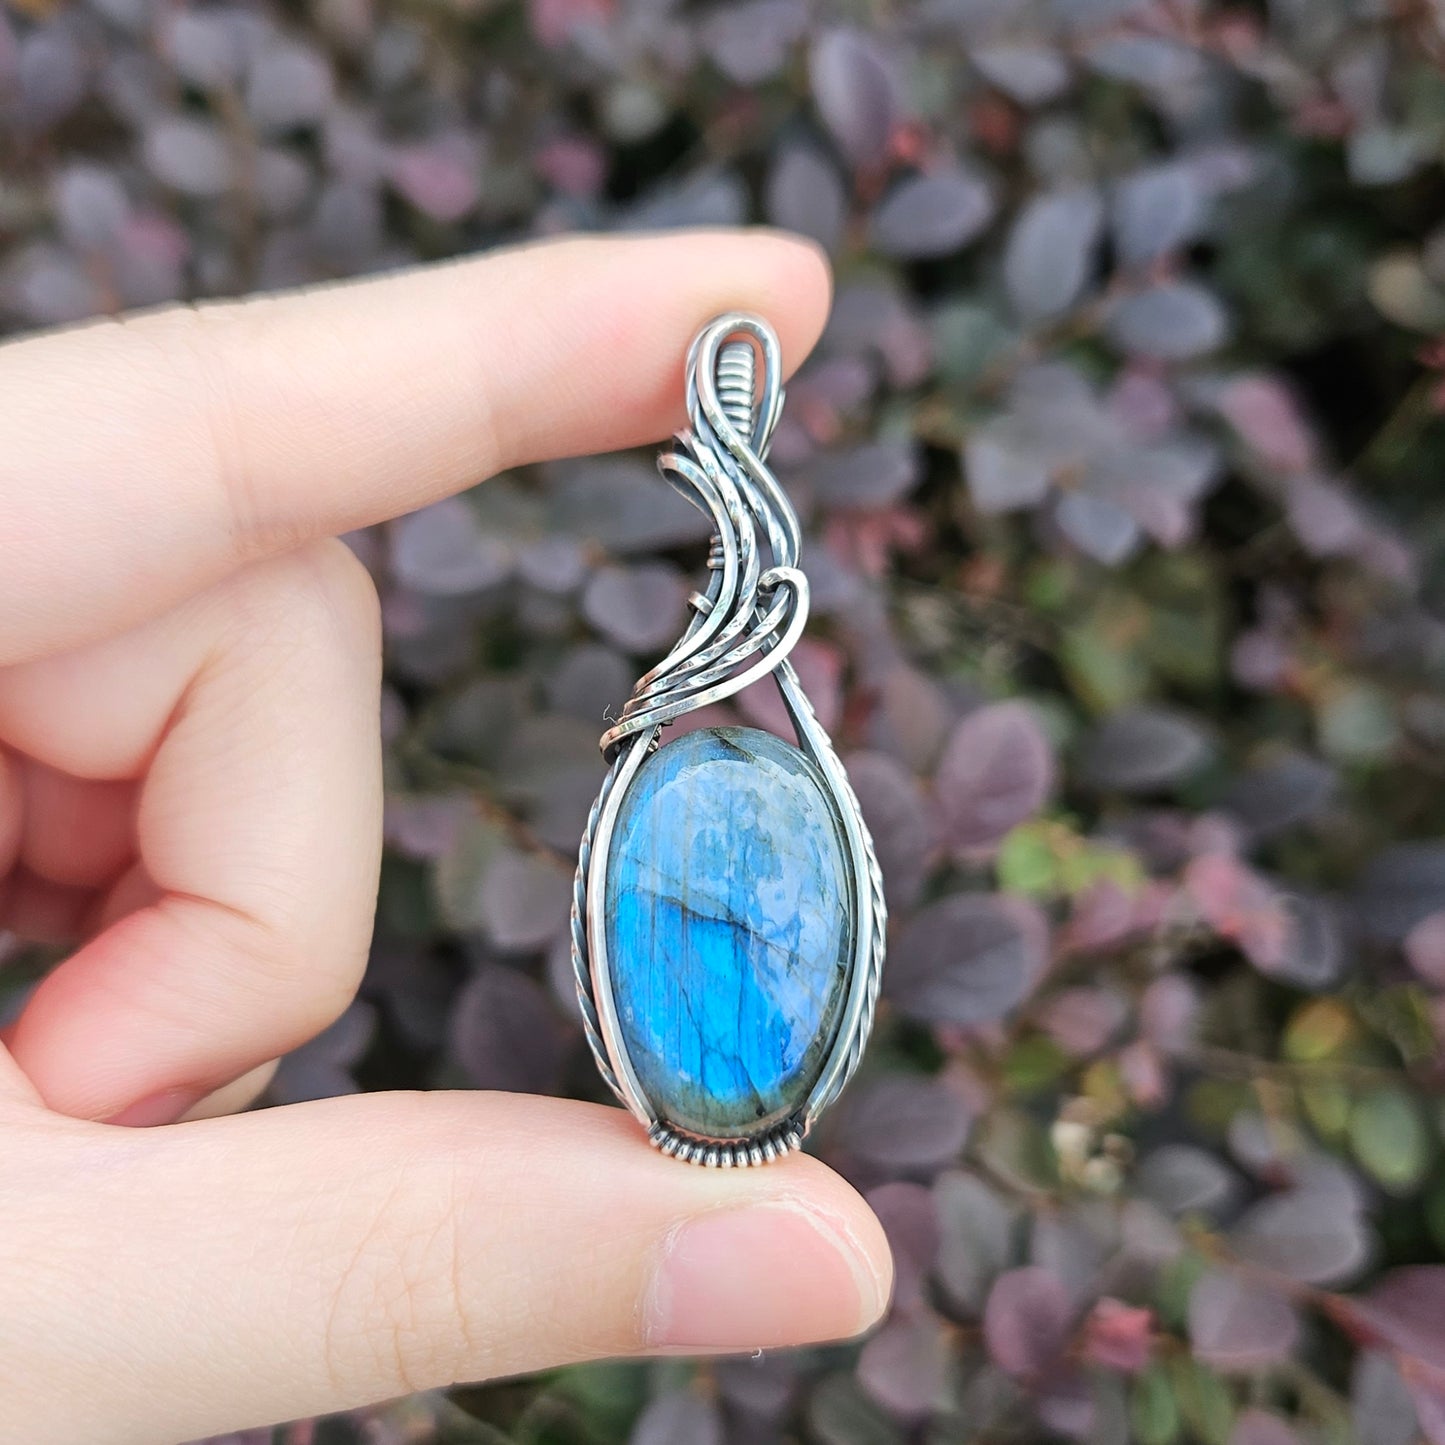 Blue Labradorite in Oxidised 925 Solid Sterling Silver Handmade Wire-Wrap Pendant